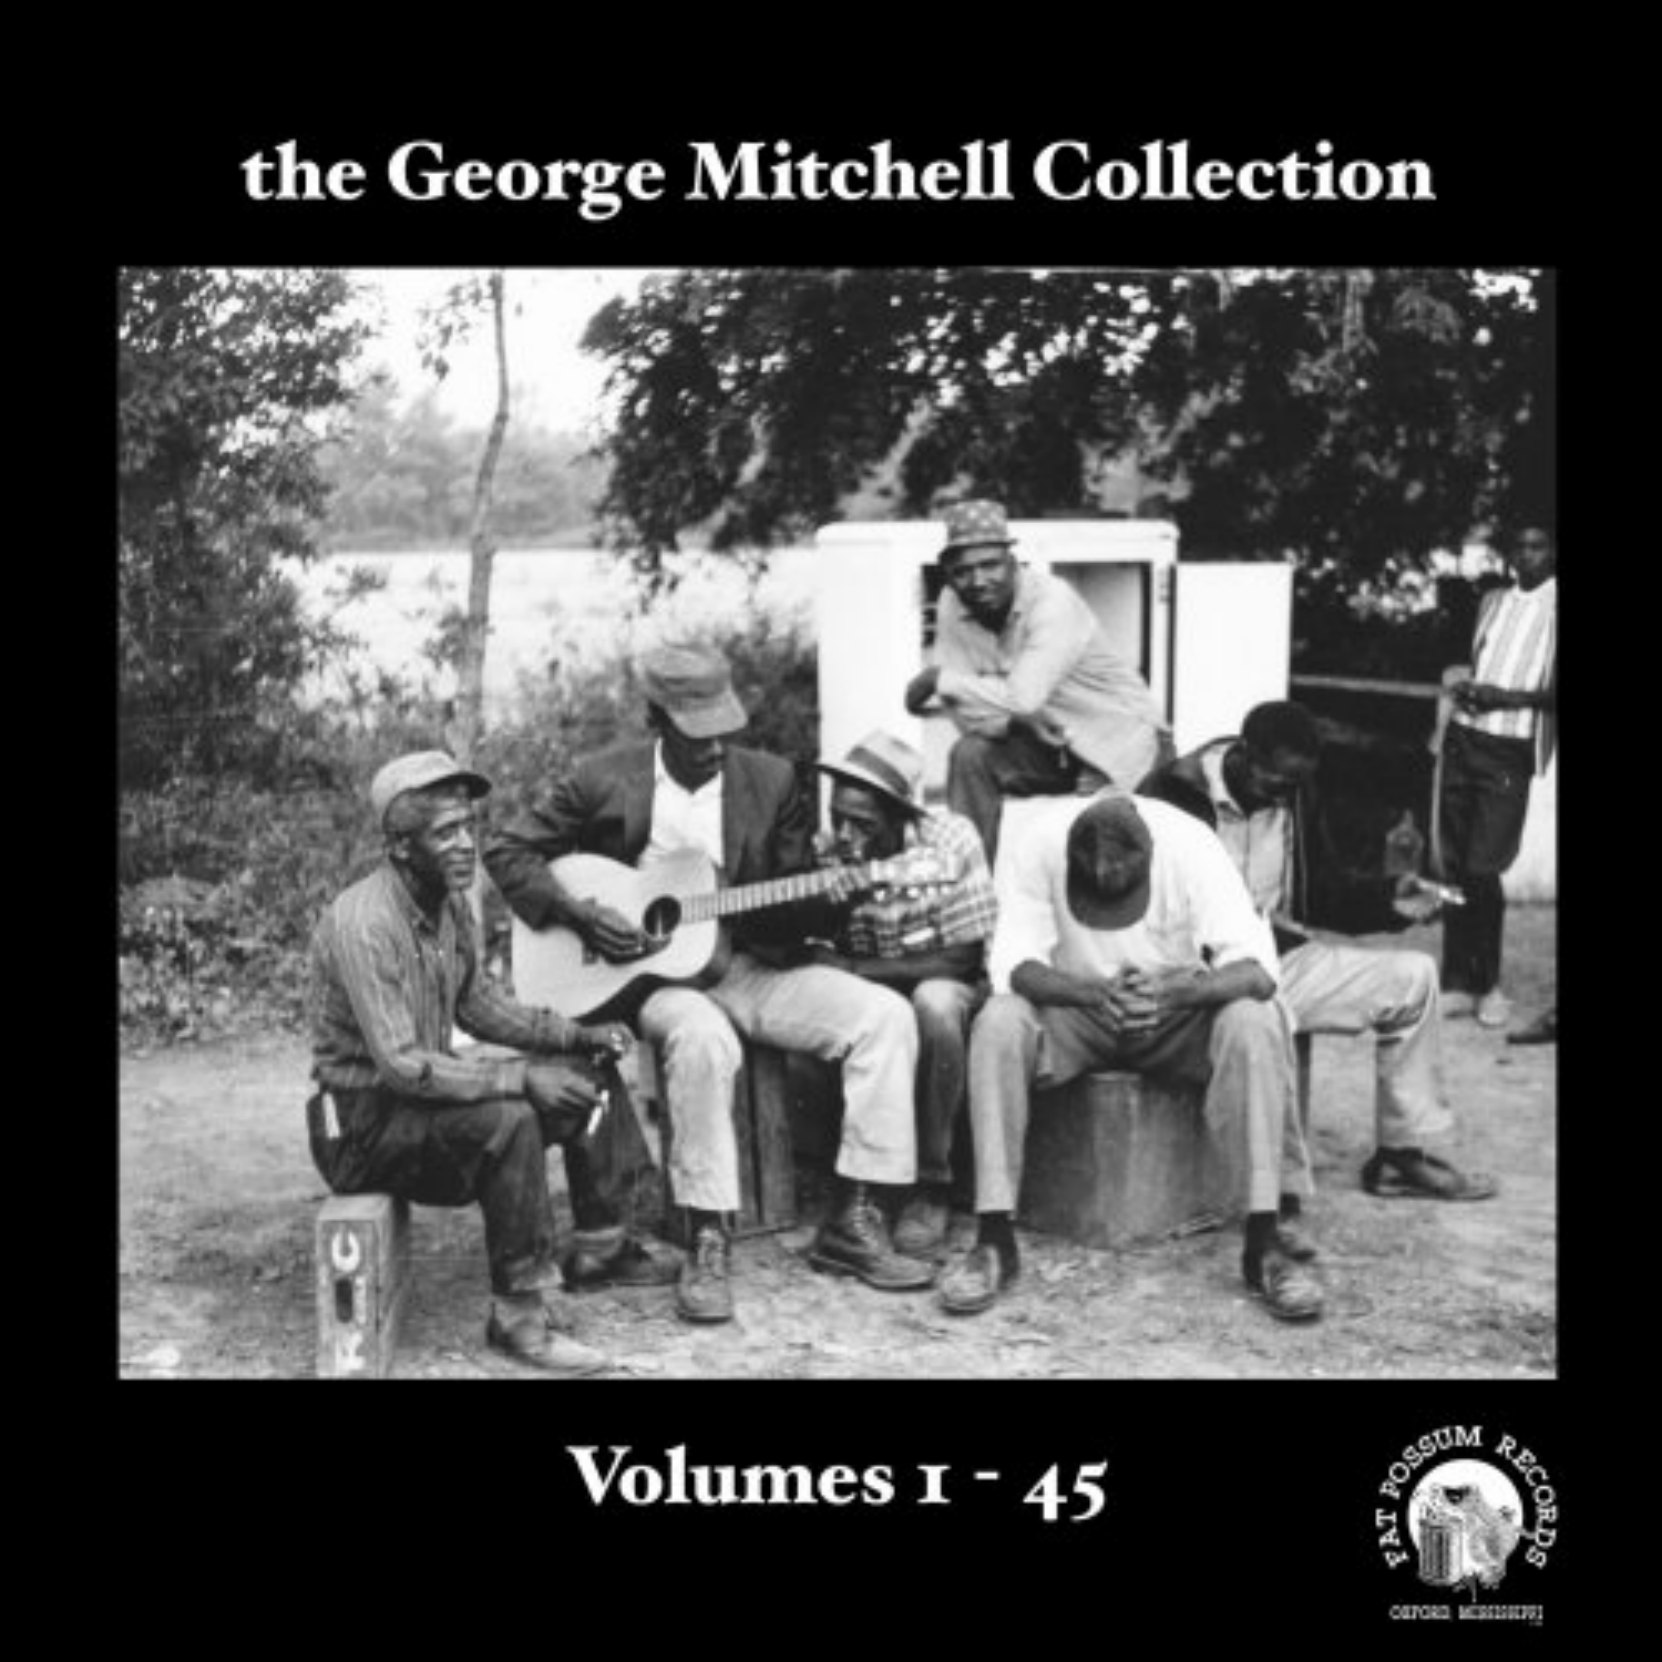 CD Cover, The George Mitchell Collection Volumes 1-45, a selection of George Mitchell recordings released on Fat Possum Records